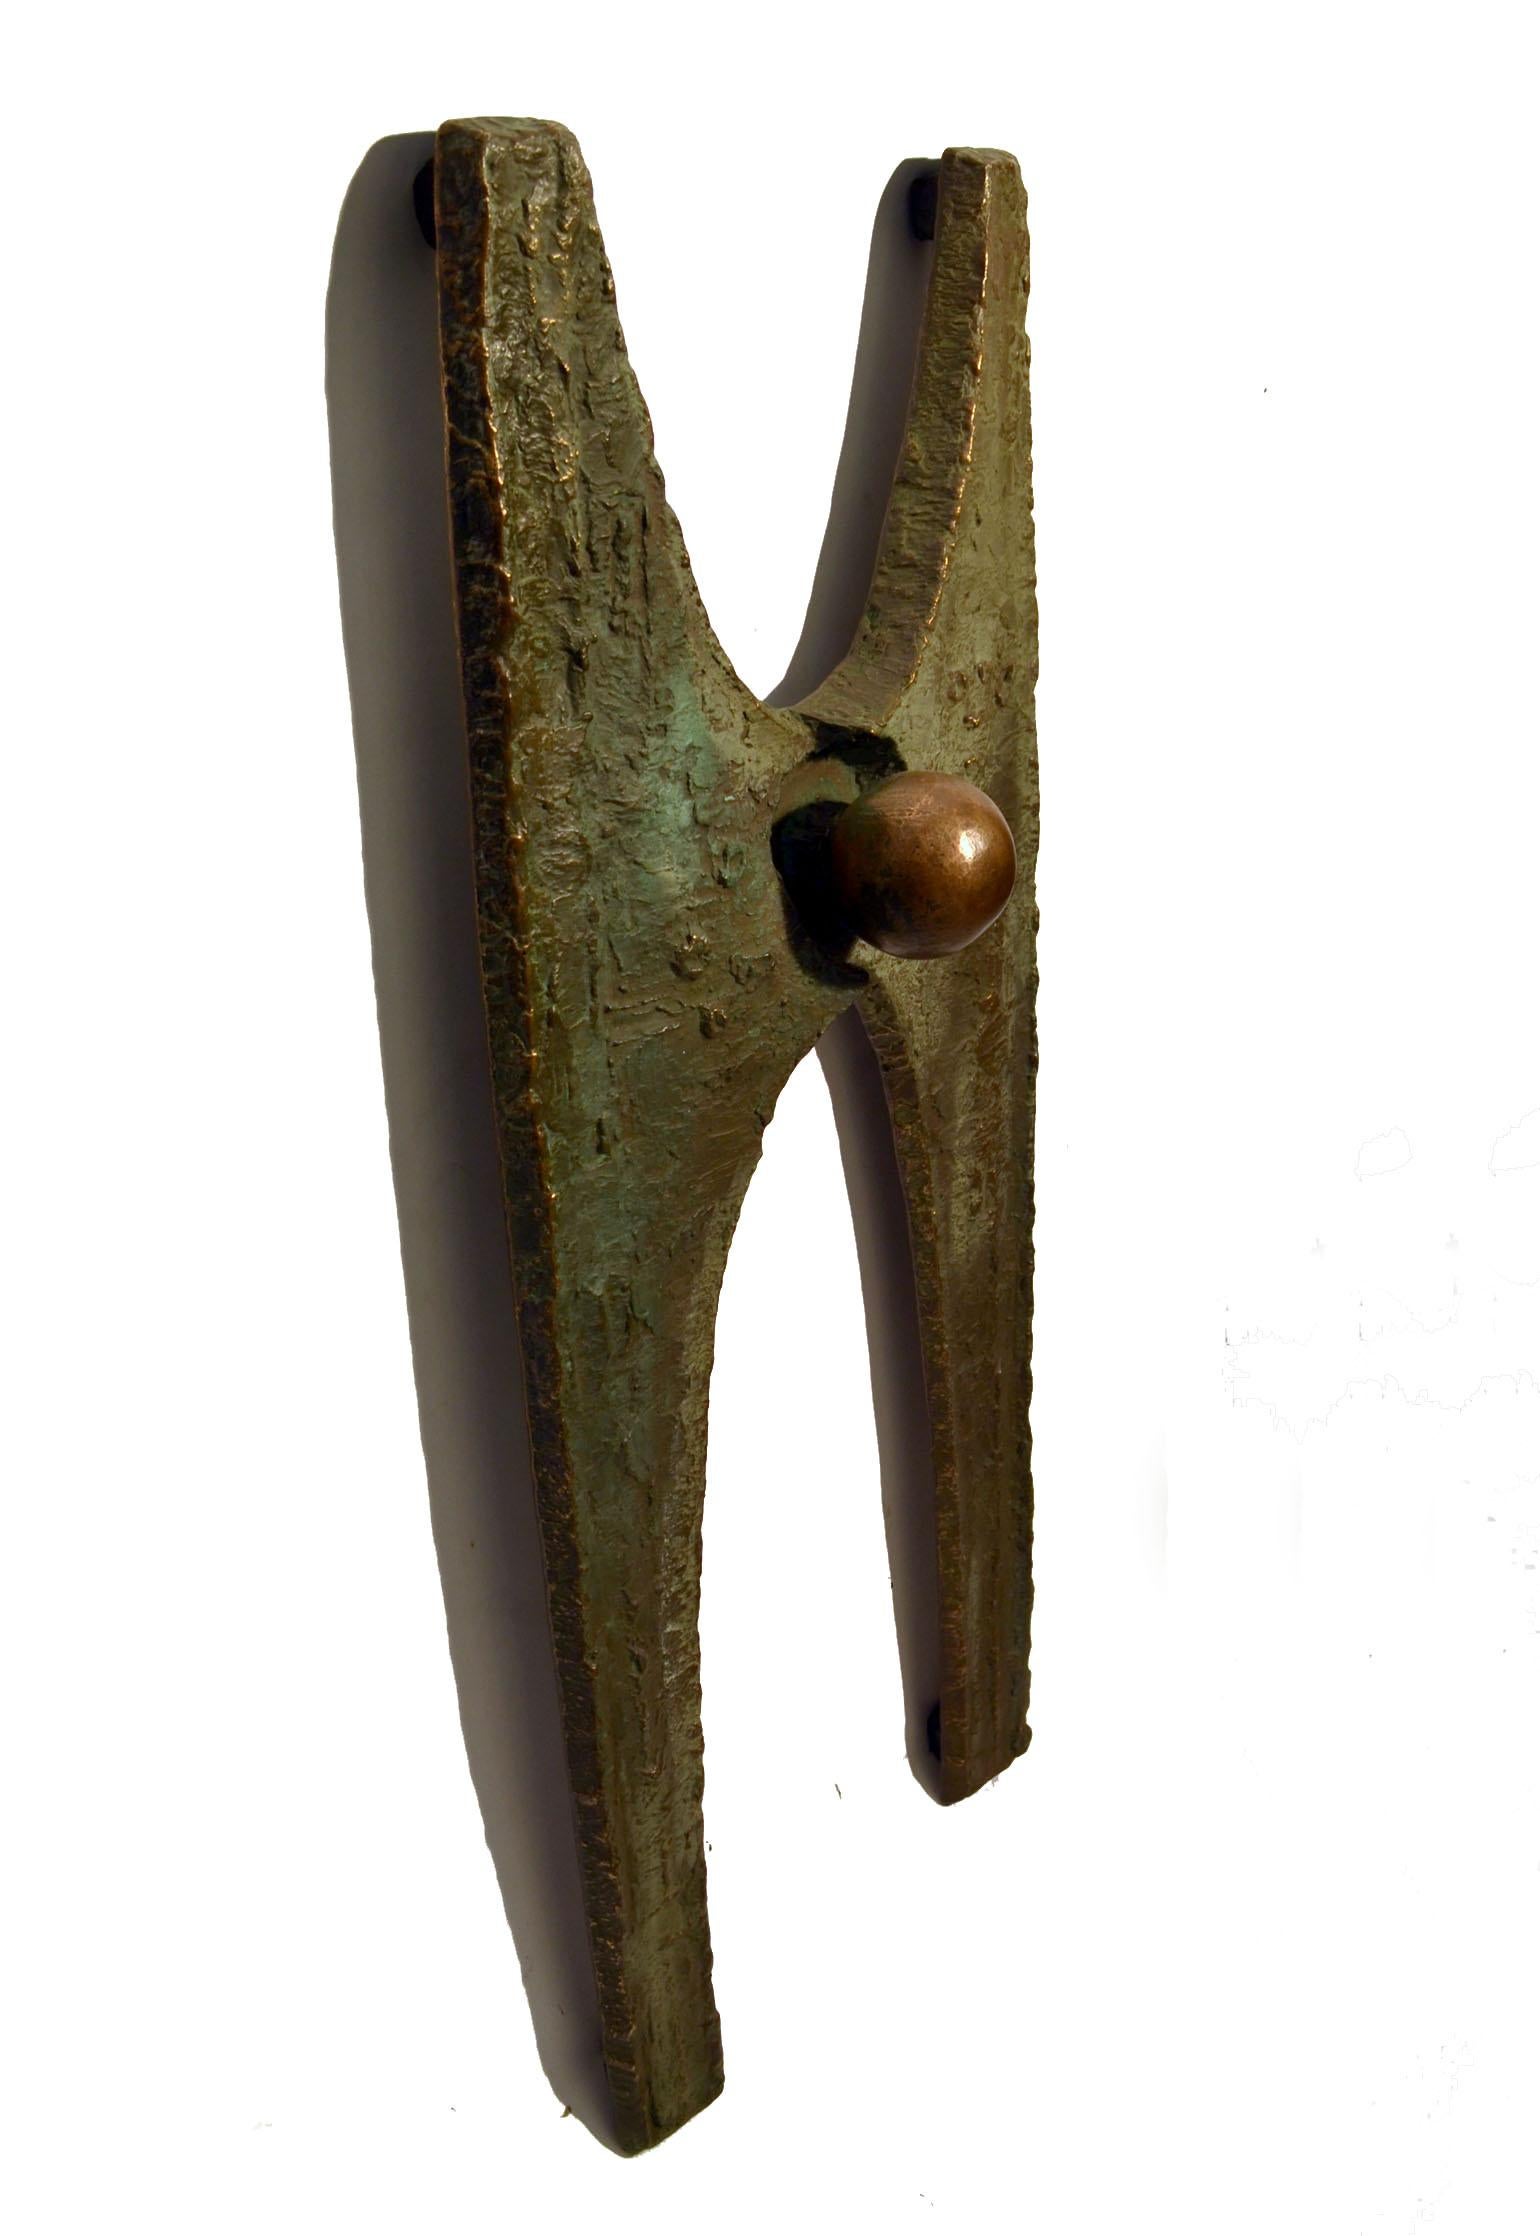 Large Architectural Bronze Door Handle and Wall Relief Sculpture For Sale 4